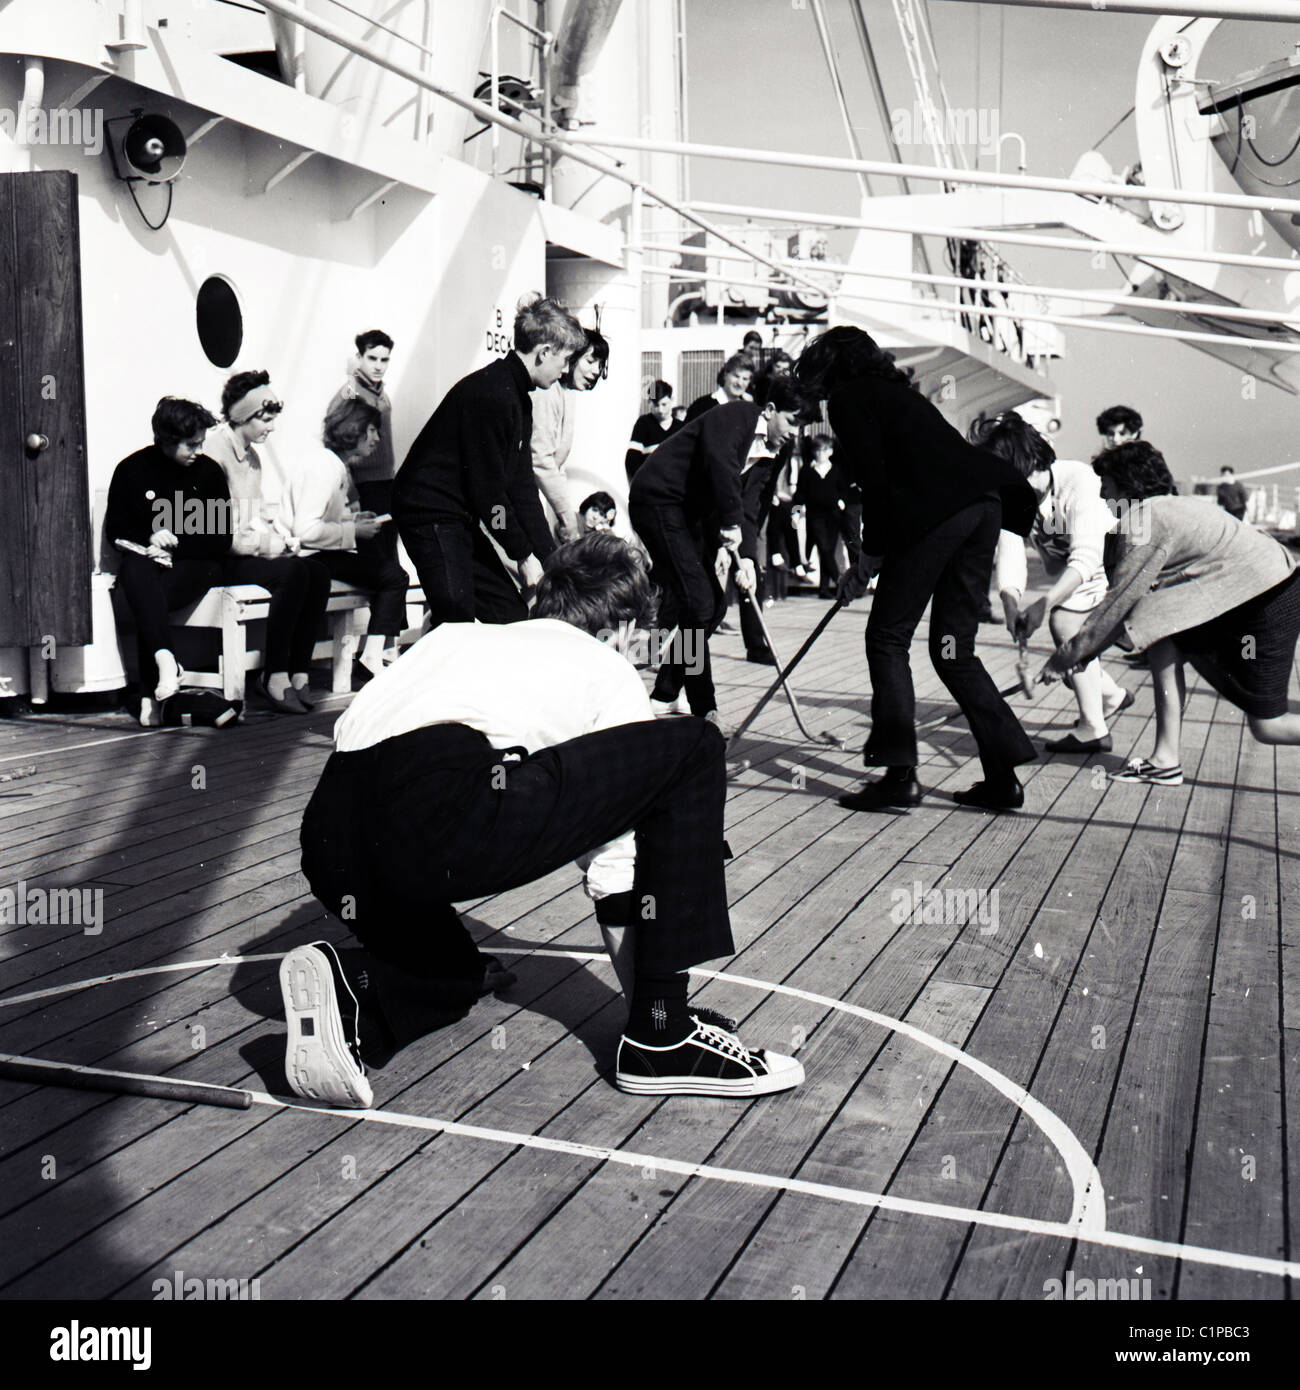 British India cruise liner, 1950s. Passengers playing hockey on the deck of the ship. Stock Photo